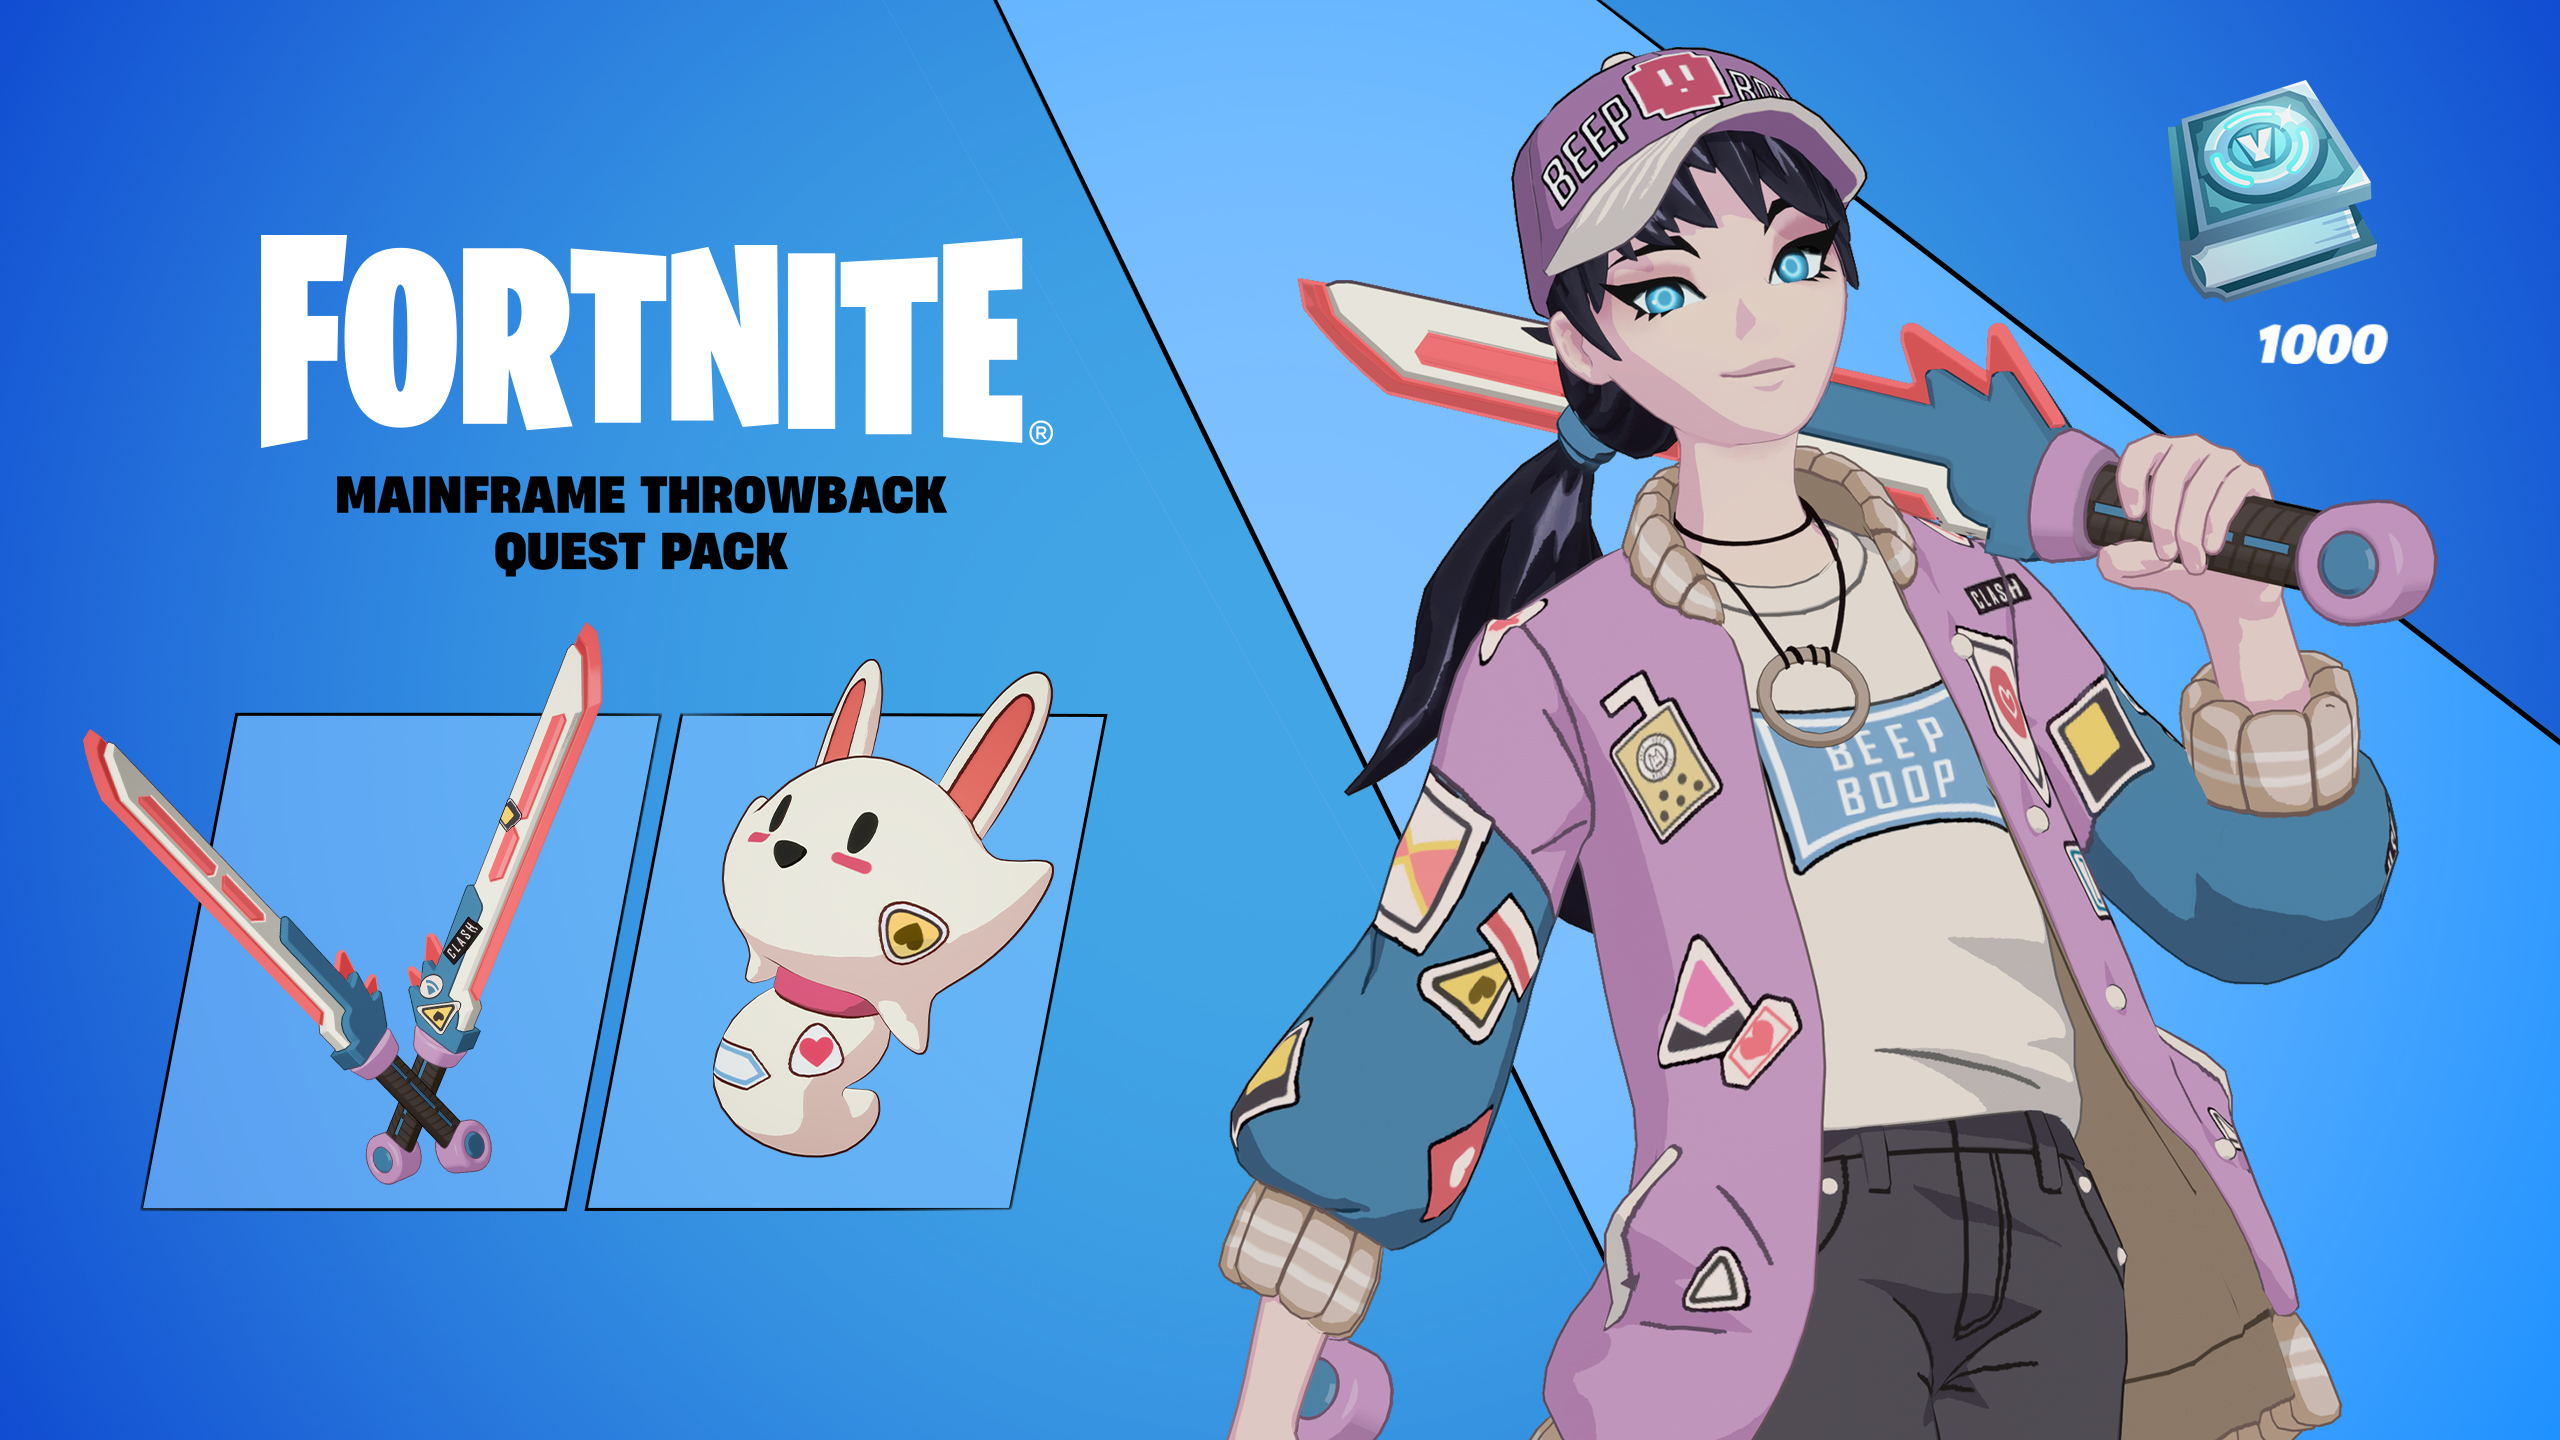 Fortnite - Mainframe Throwback Quest Pack DLC UK XBOX One / Xbox Series X|S CD Key 33.9 USD